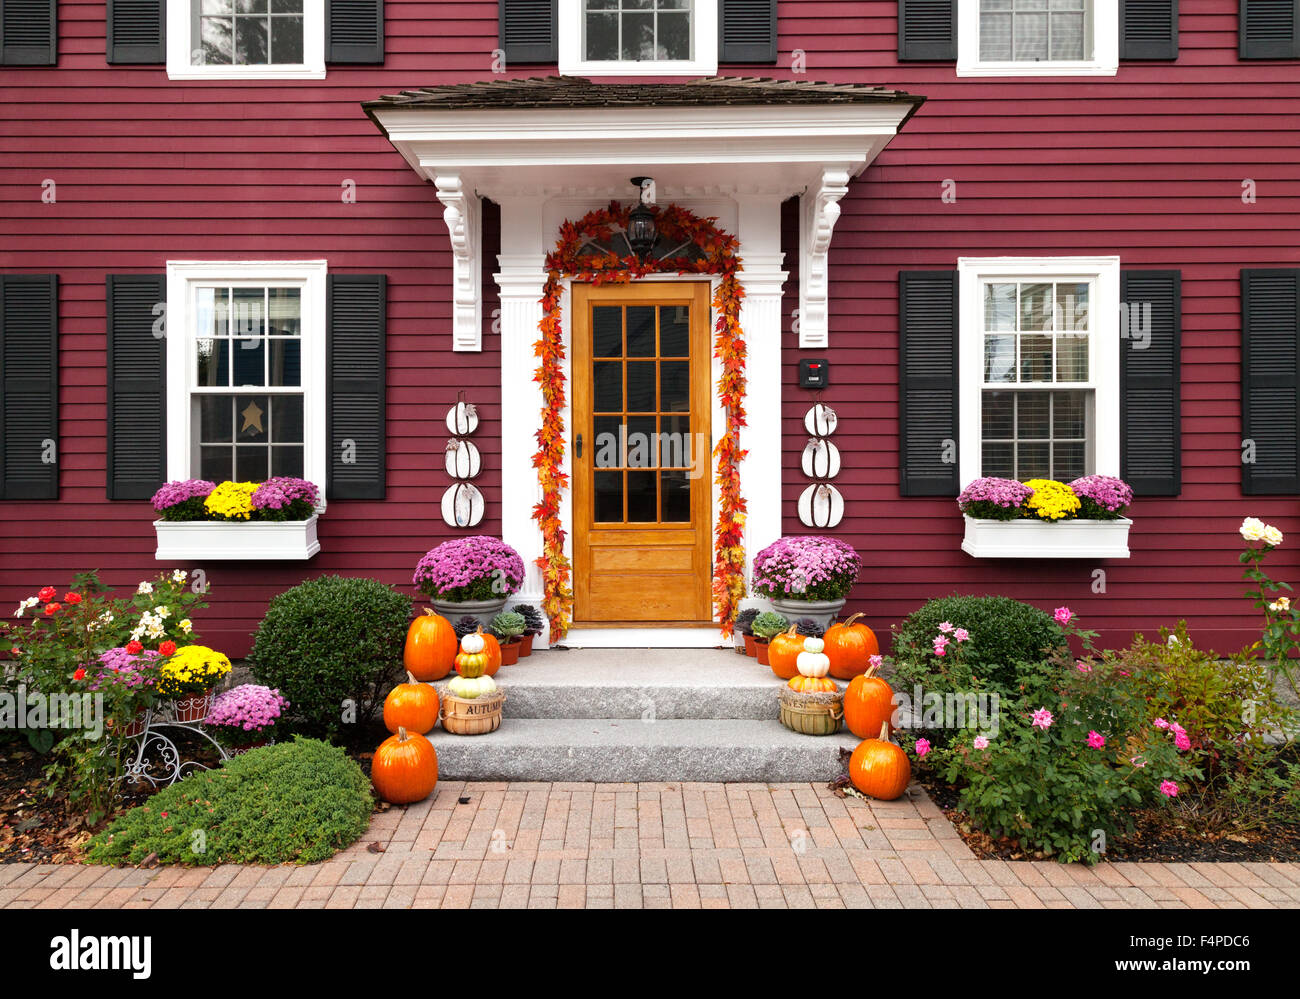 Image Result For Halloween Decorated Houses